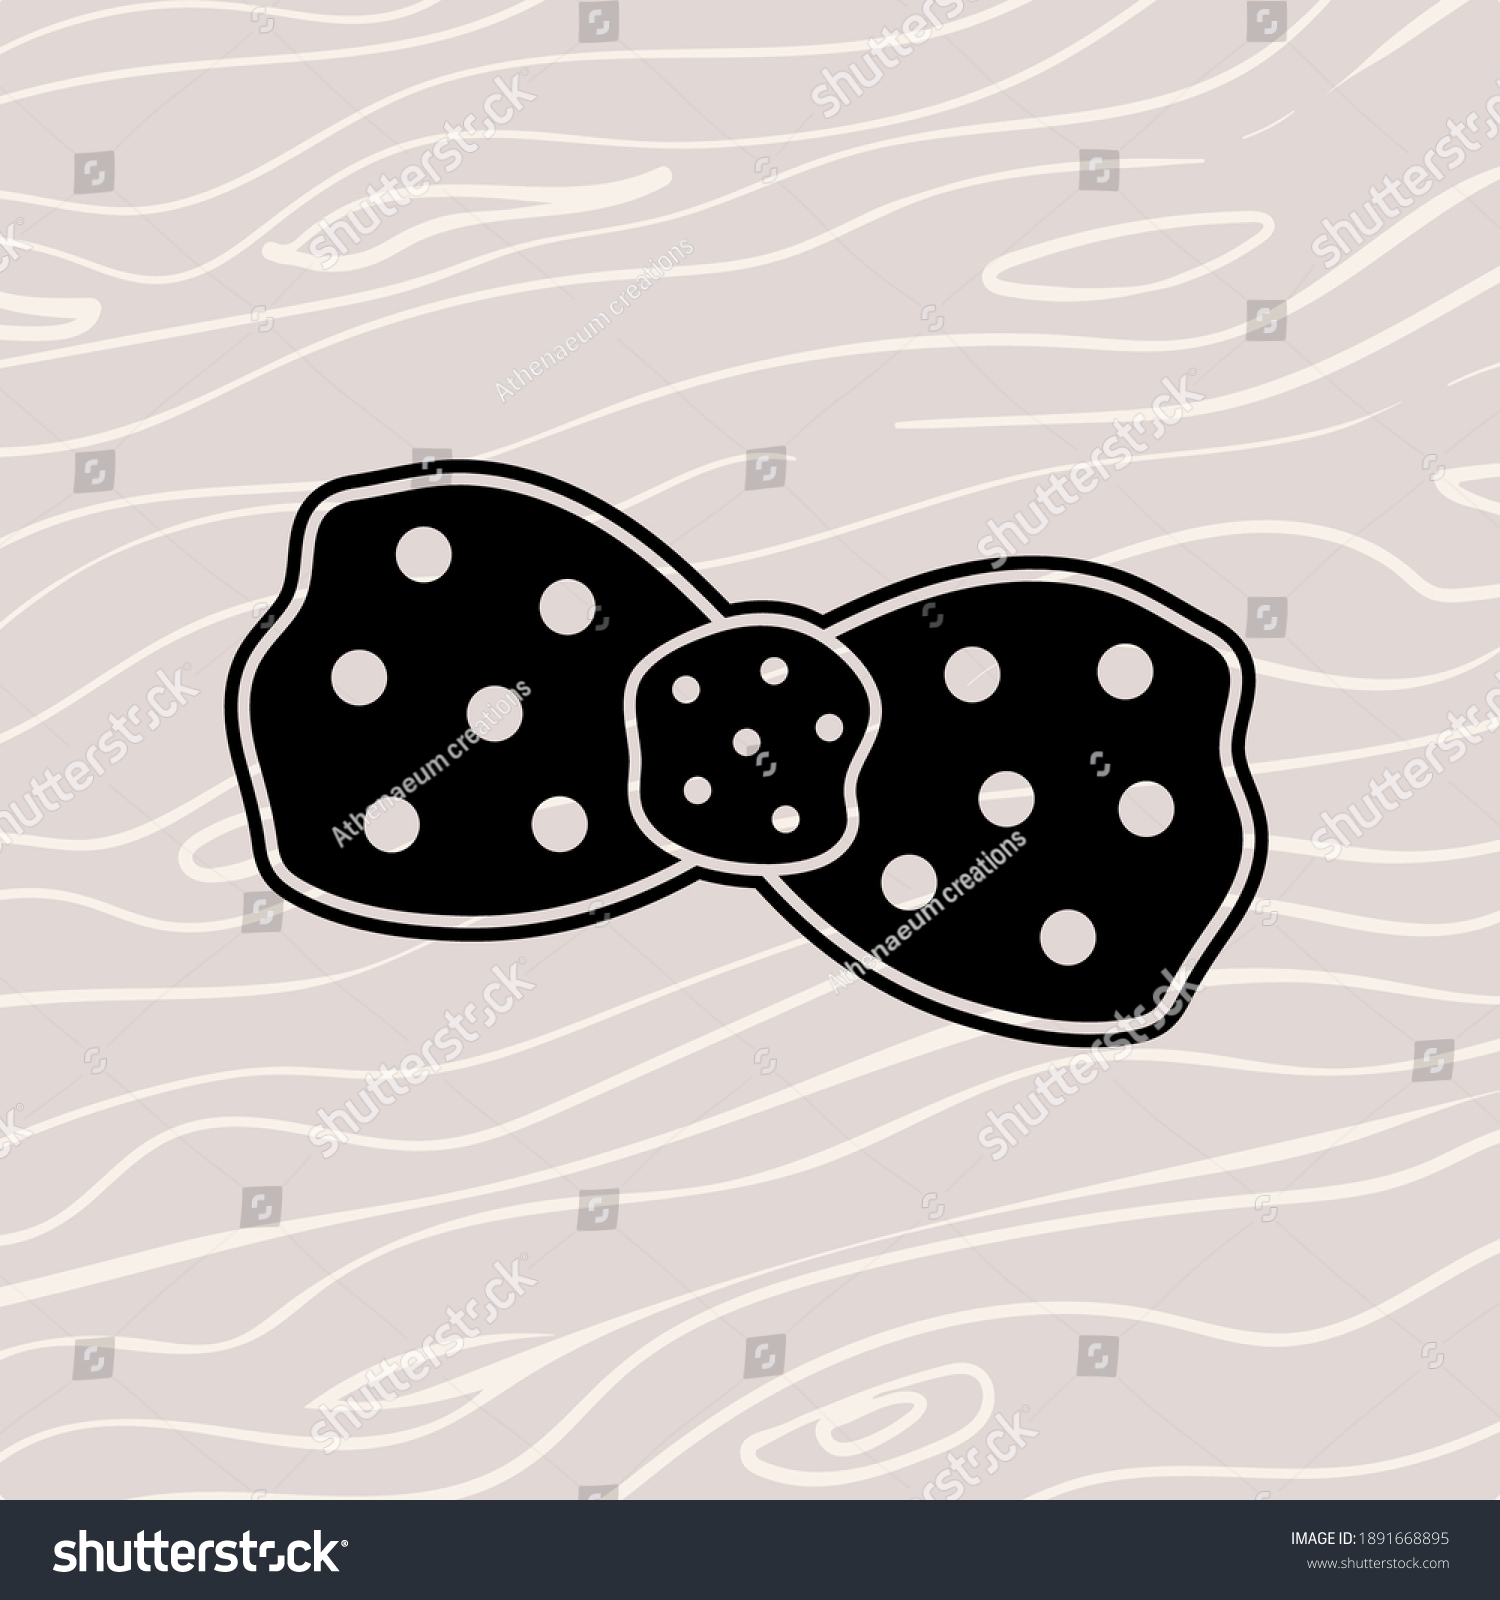 SVG of Bow with dots icon. Girl bow symbol. Birth Stats icon for Birth Announcement design. Baby Stats element. Vector illustration for decorating albums, metrics, posters and invitation cards for baby. svg